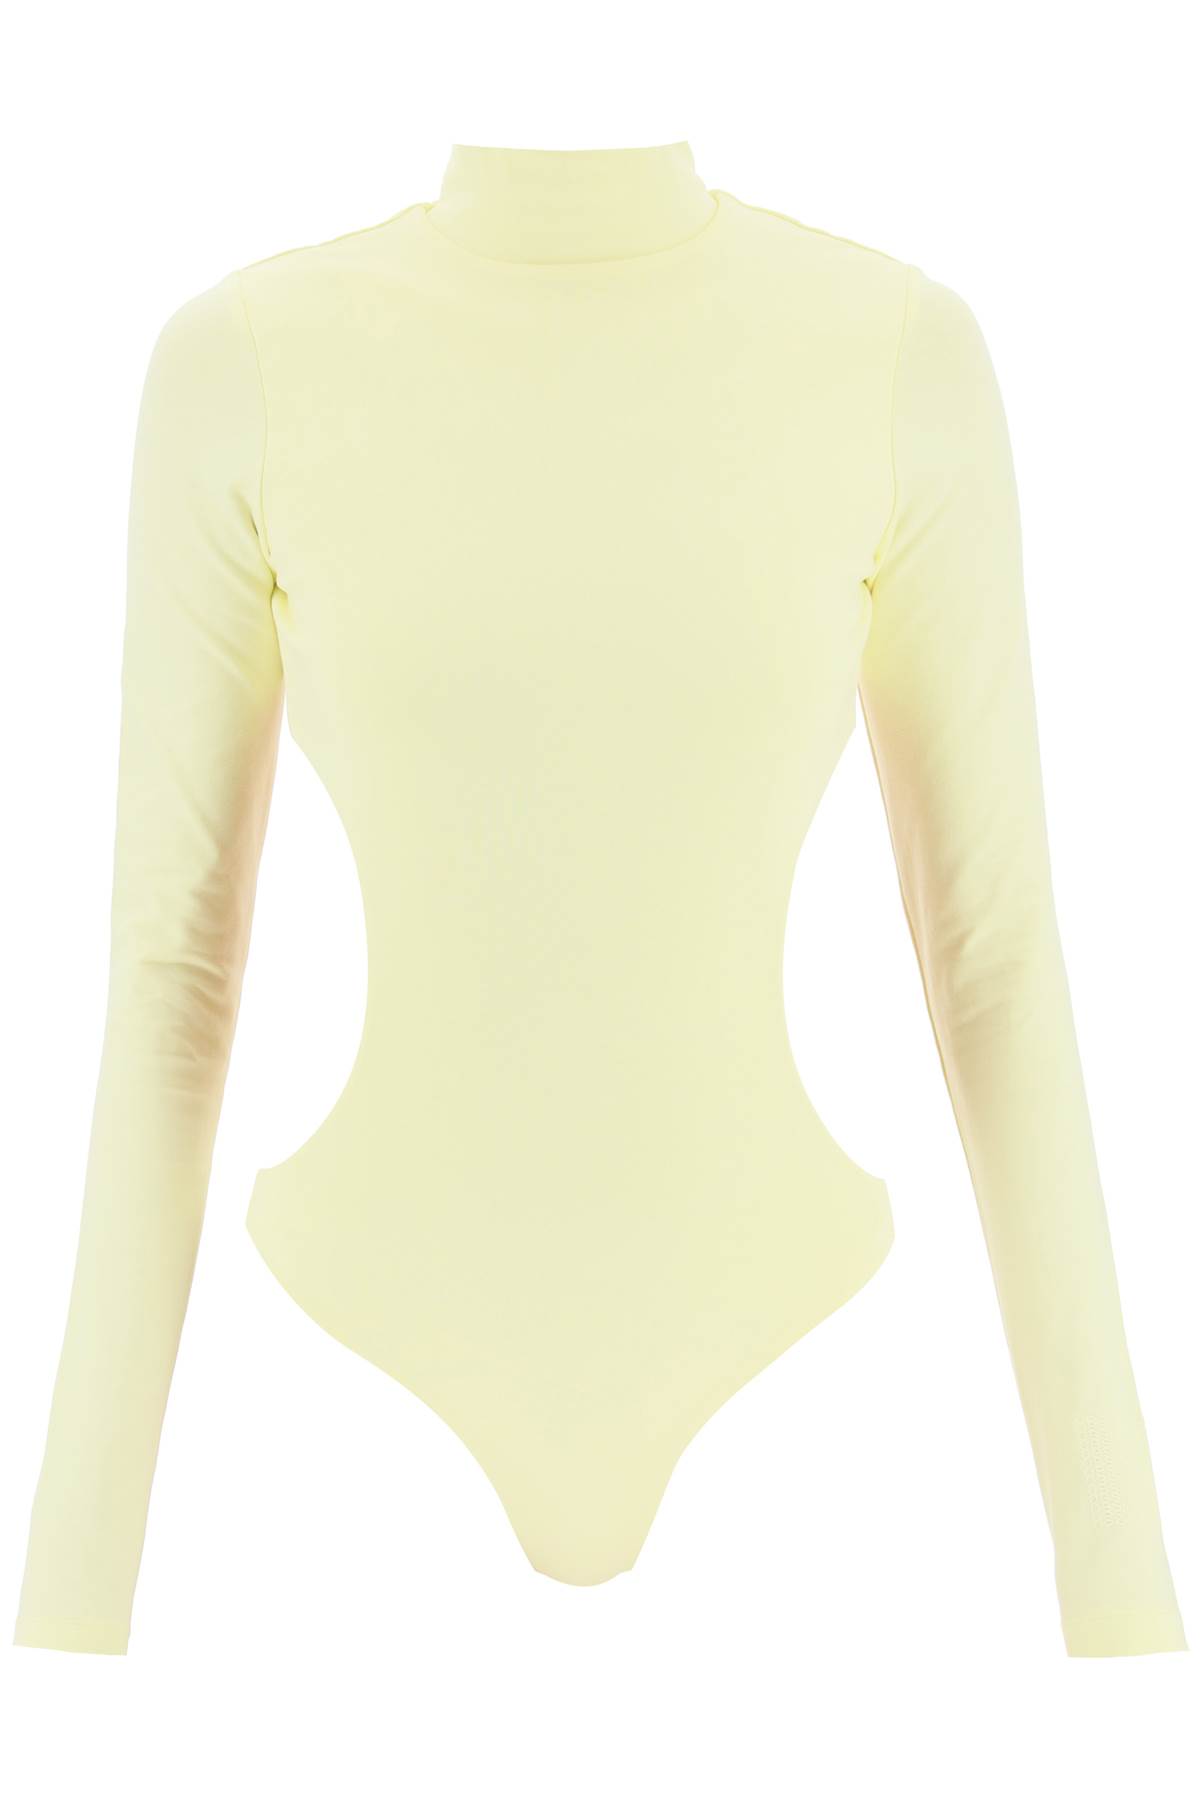 Marc Jacobs The Cutout Bodysuit In White